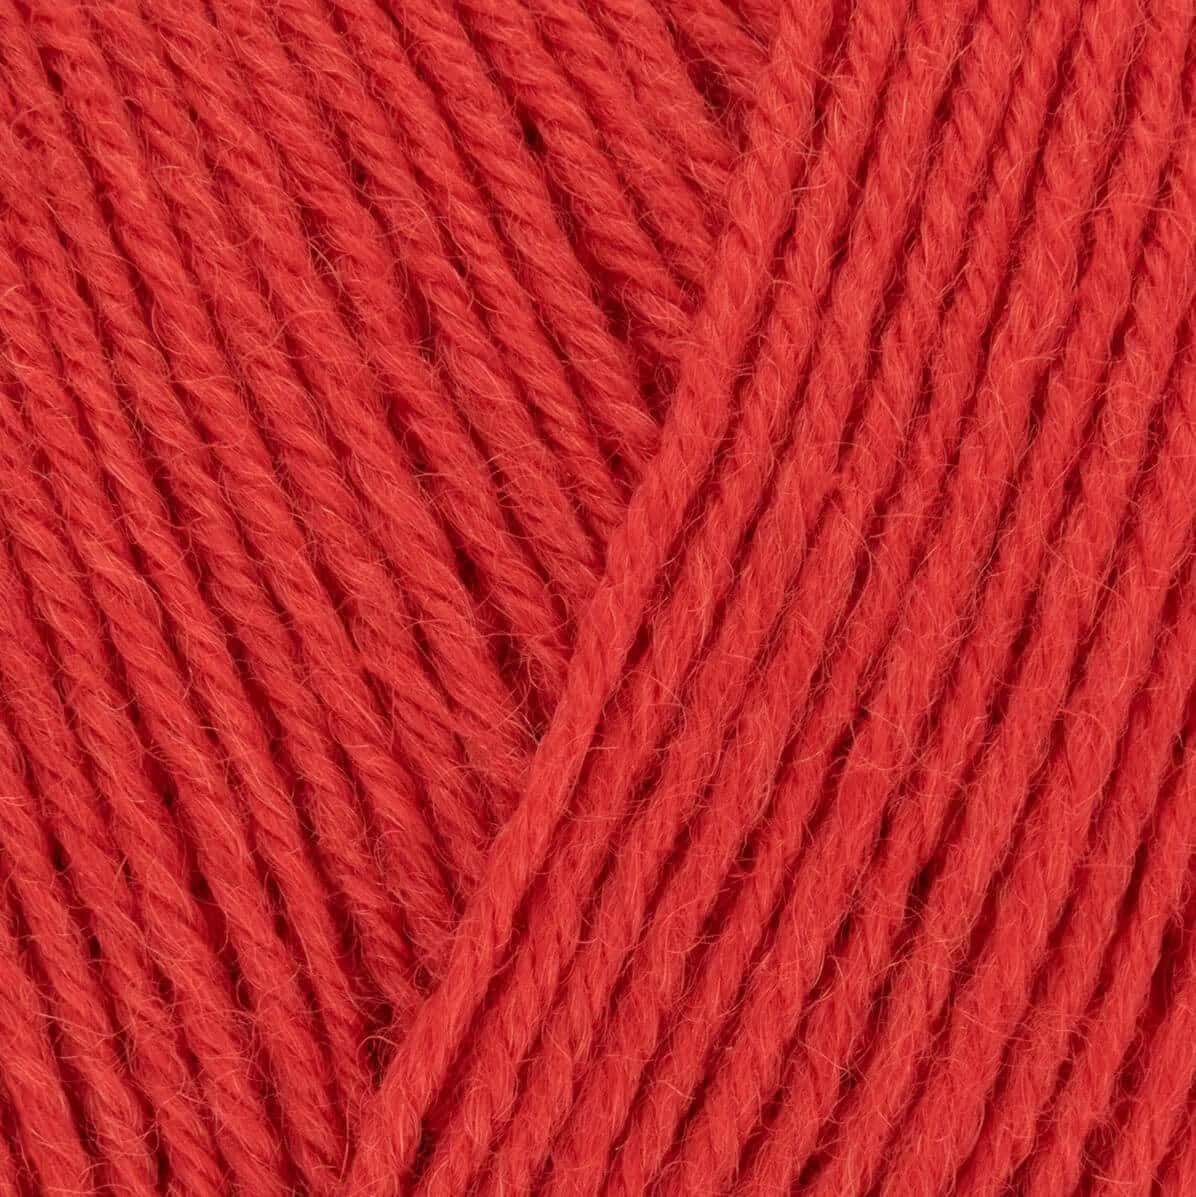 West Yorkshire Spinners Signature 4ply - Cayenne Pepper 510